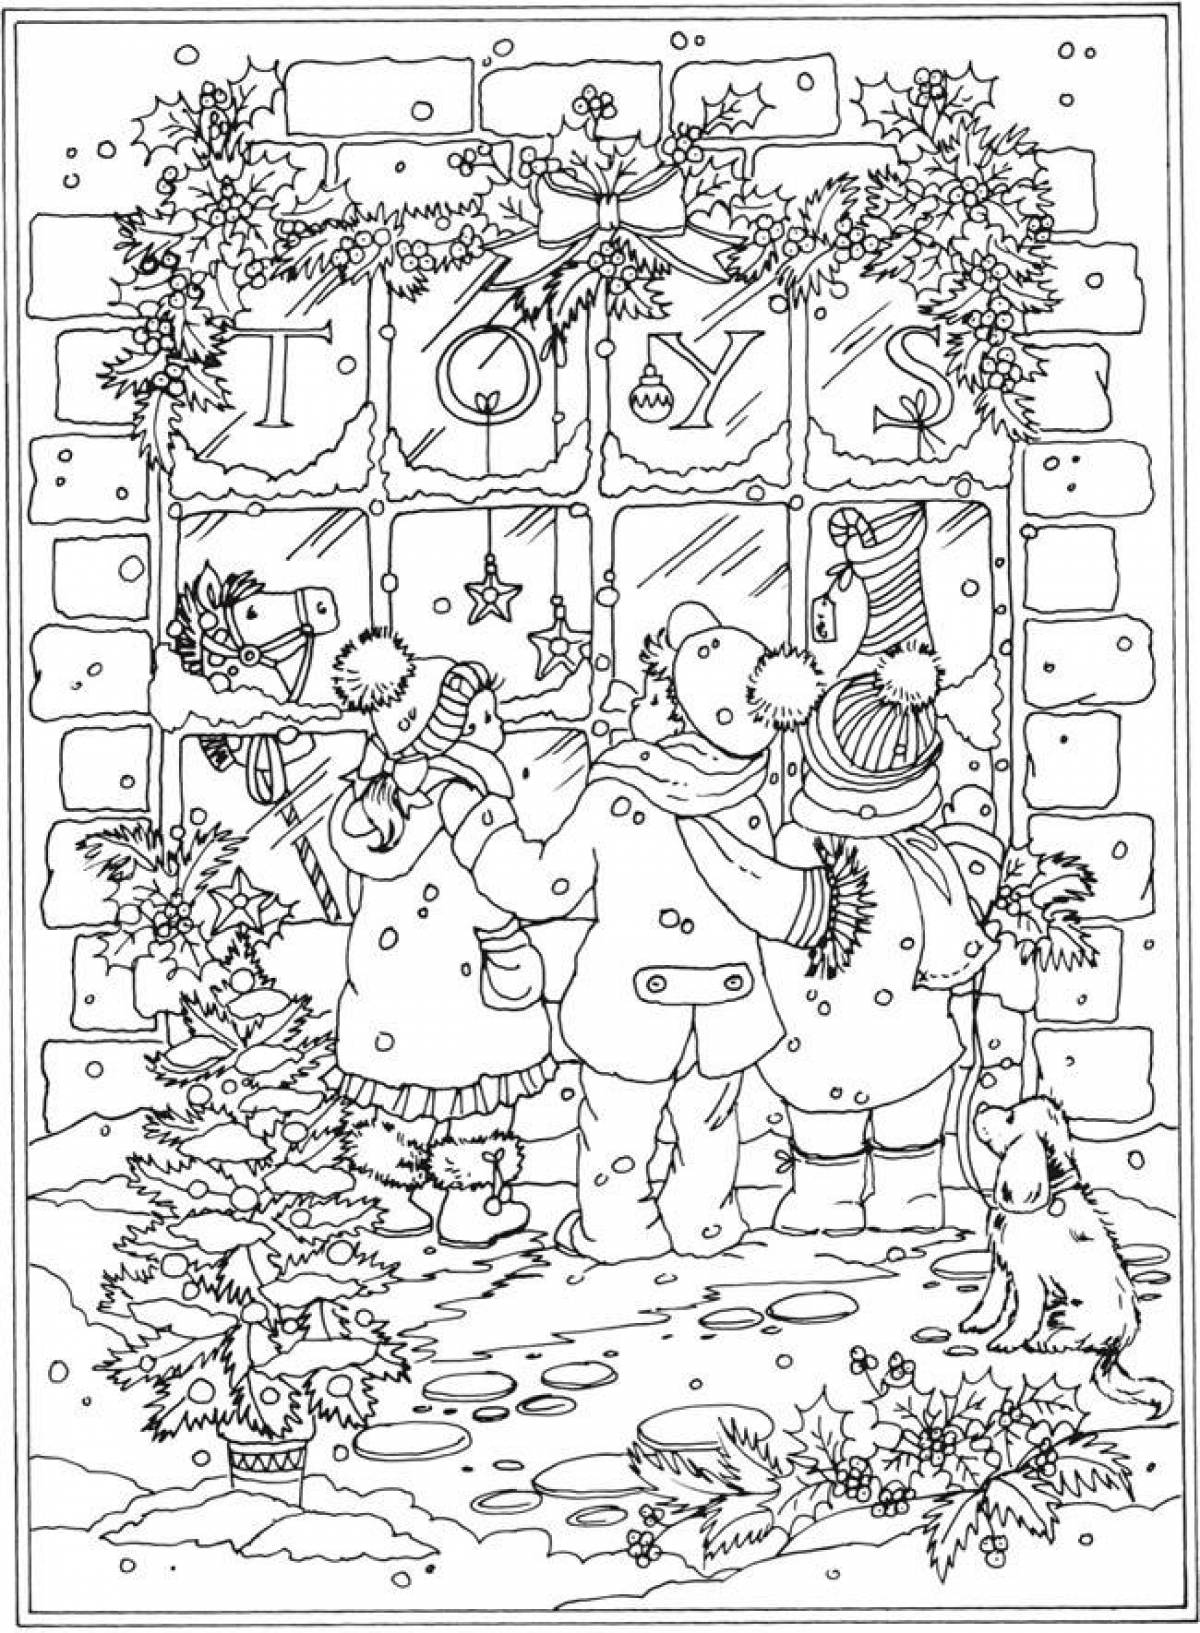 A fascinating Christmas complex coloring book